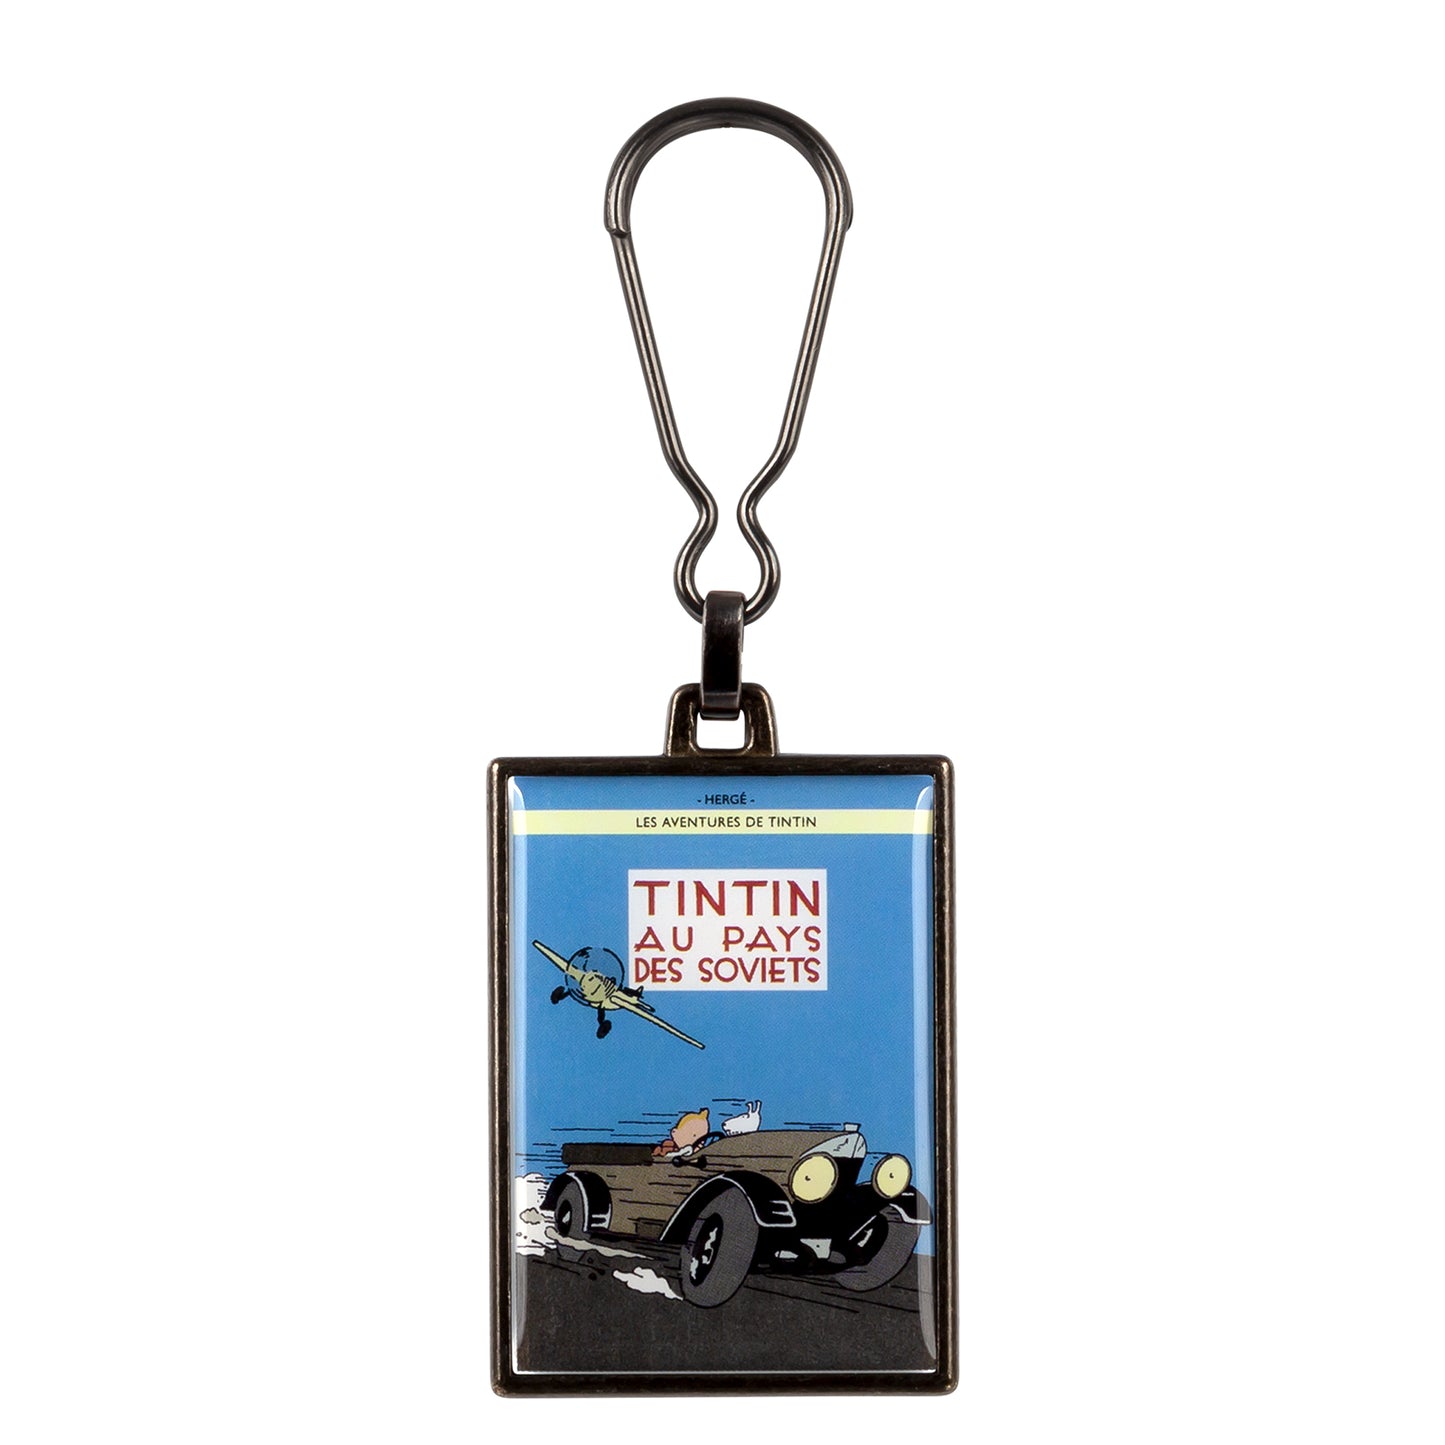 In the Land of Soviets colorized metal keyring